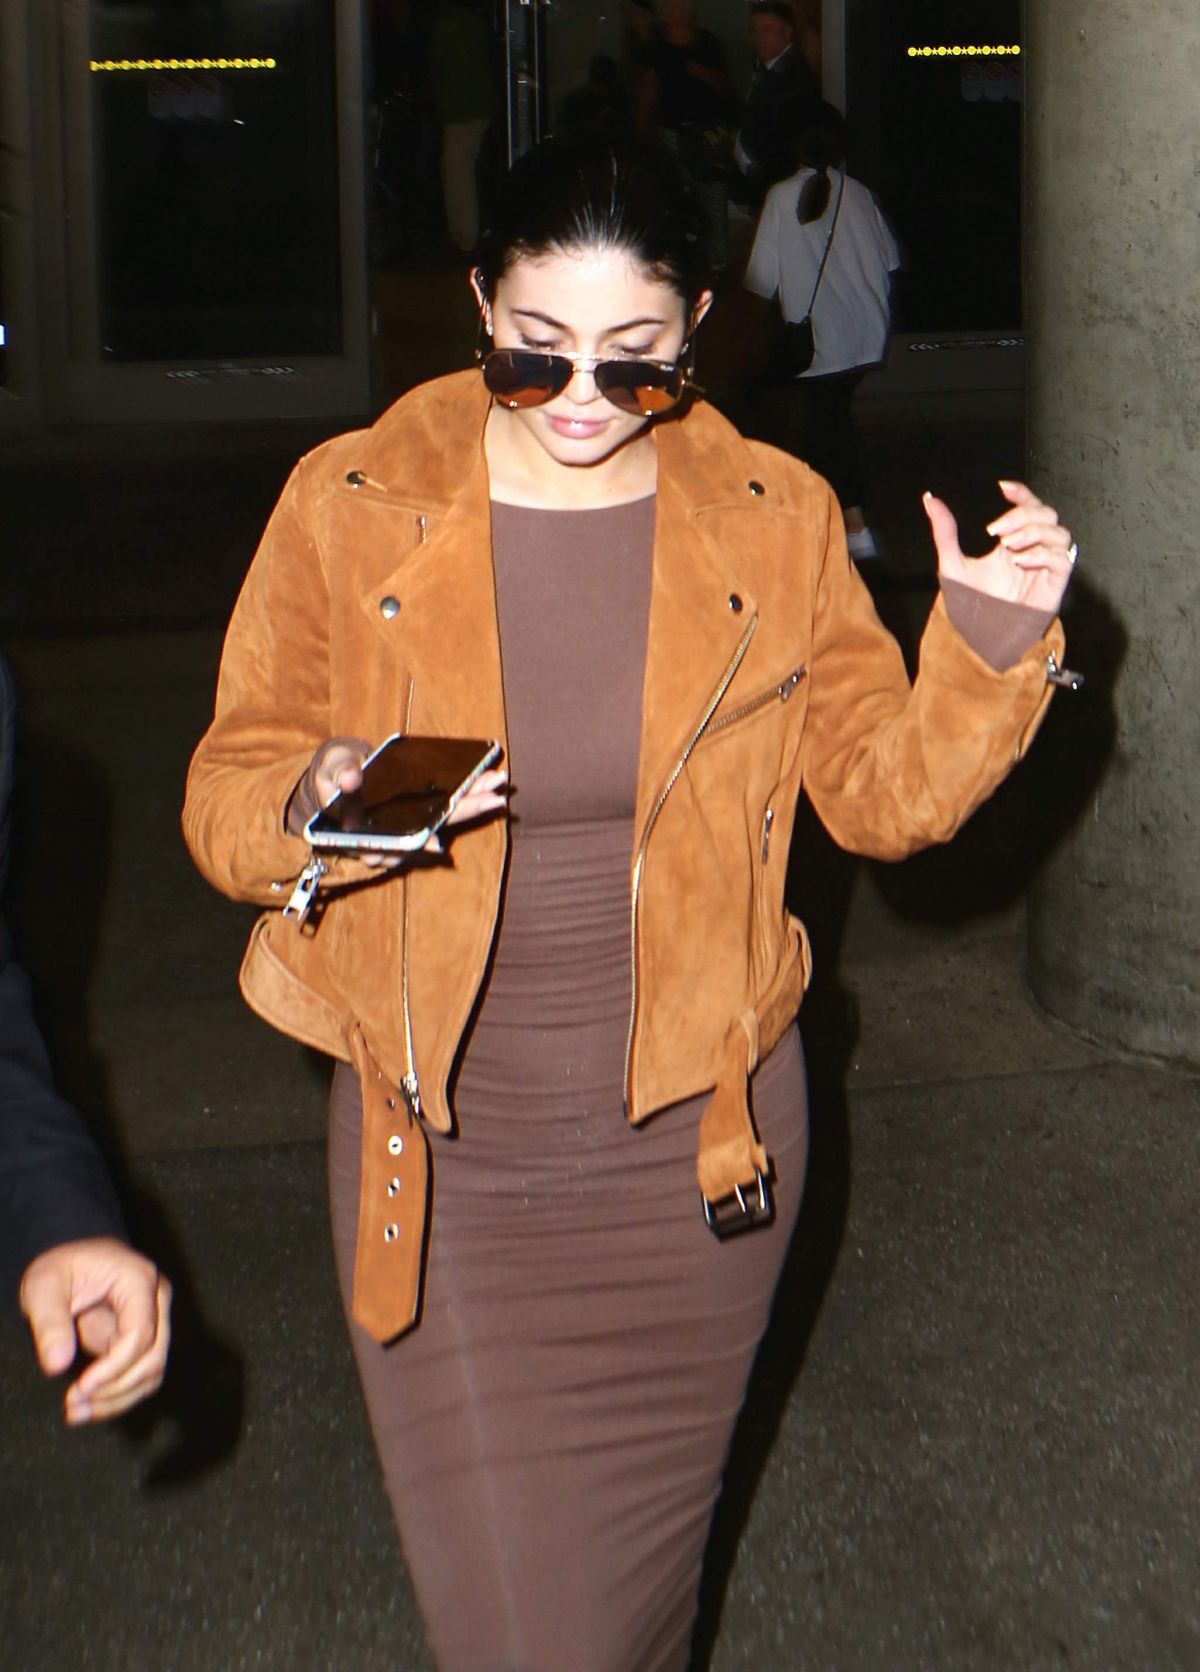 KYLIE JENNER at Los Angeles International Airport 07/13/2016 – HawtCelebs